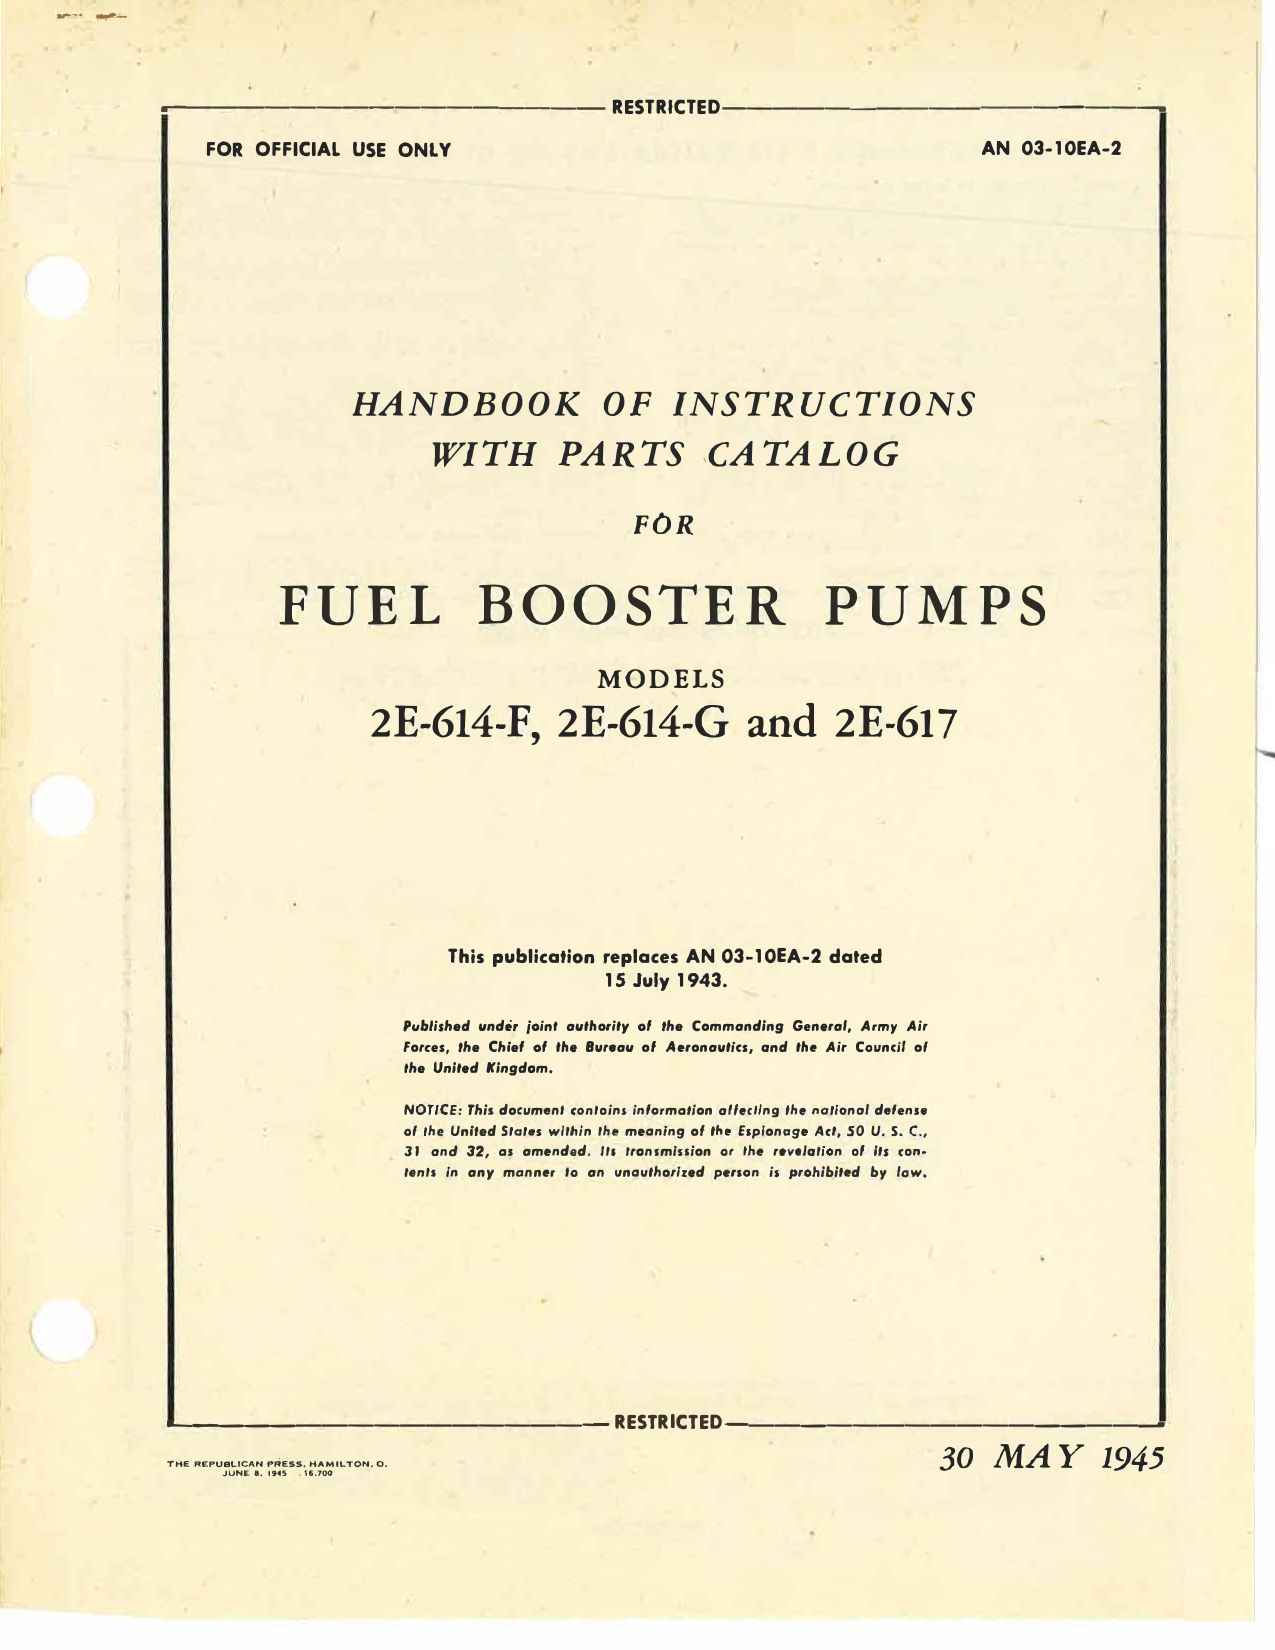 Sample page 5 from AirCorps Library document: Operation, Service, & Overhaul Instructions with Parts Catalog for Fuel Booster Pumps